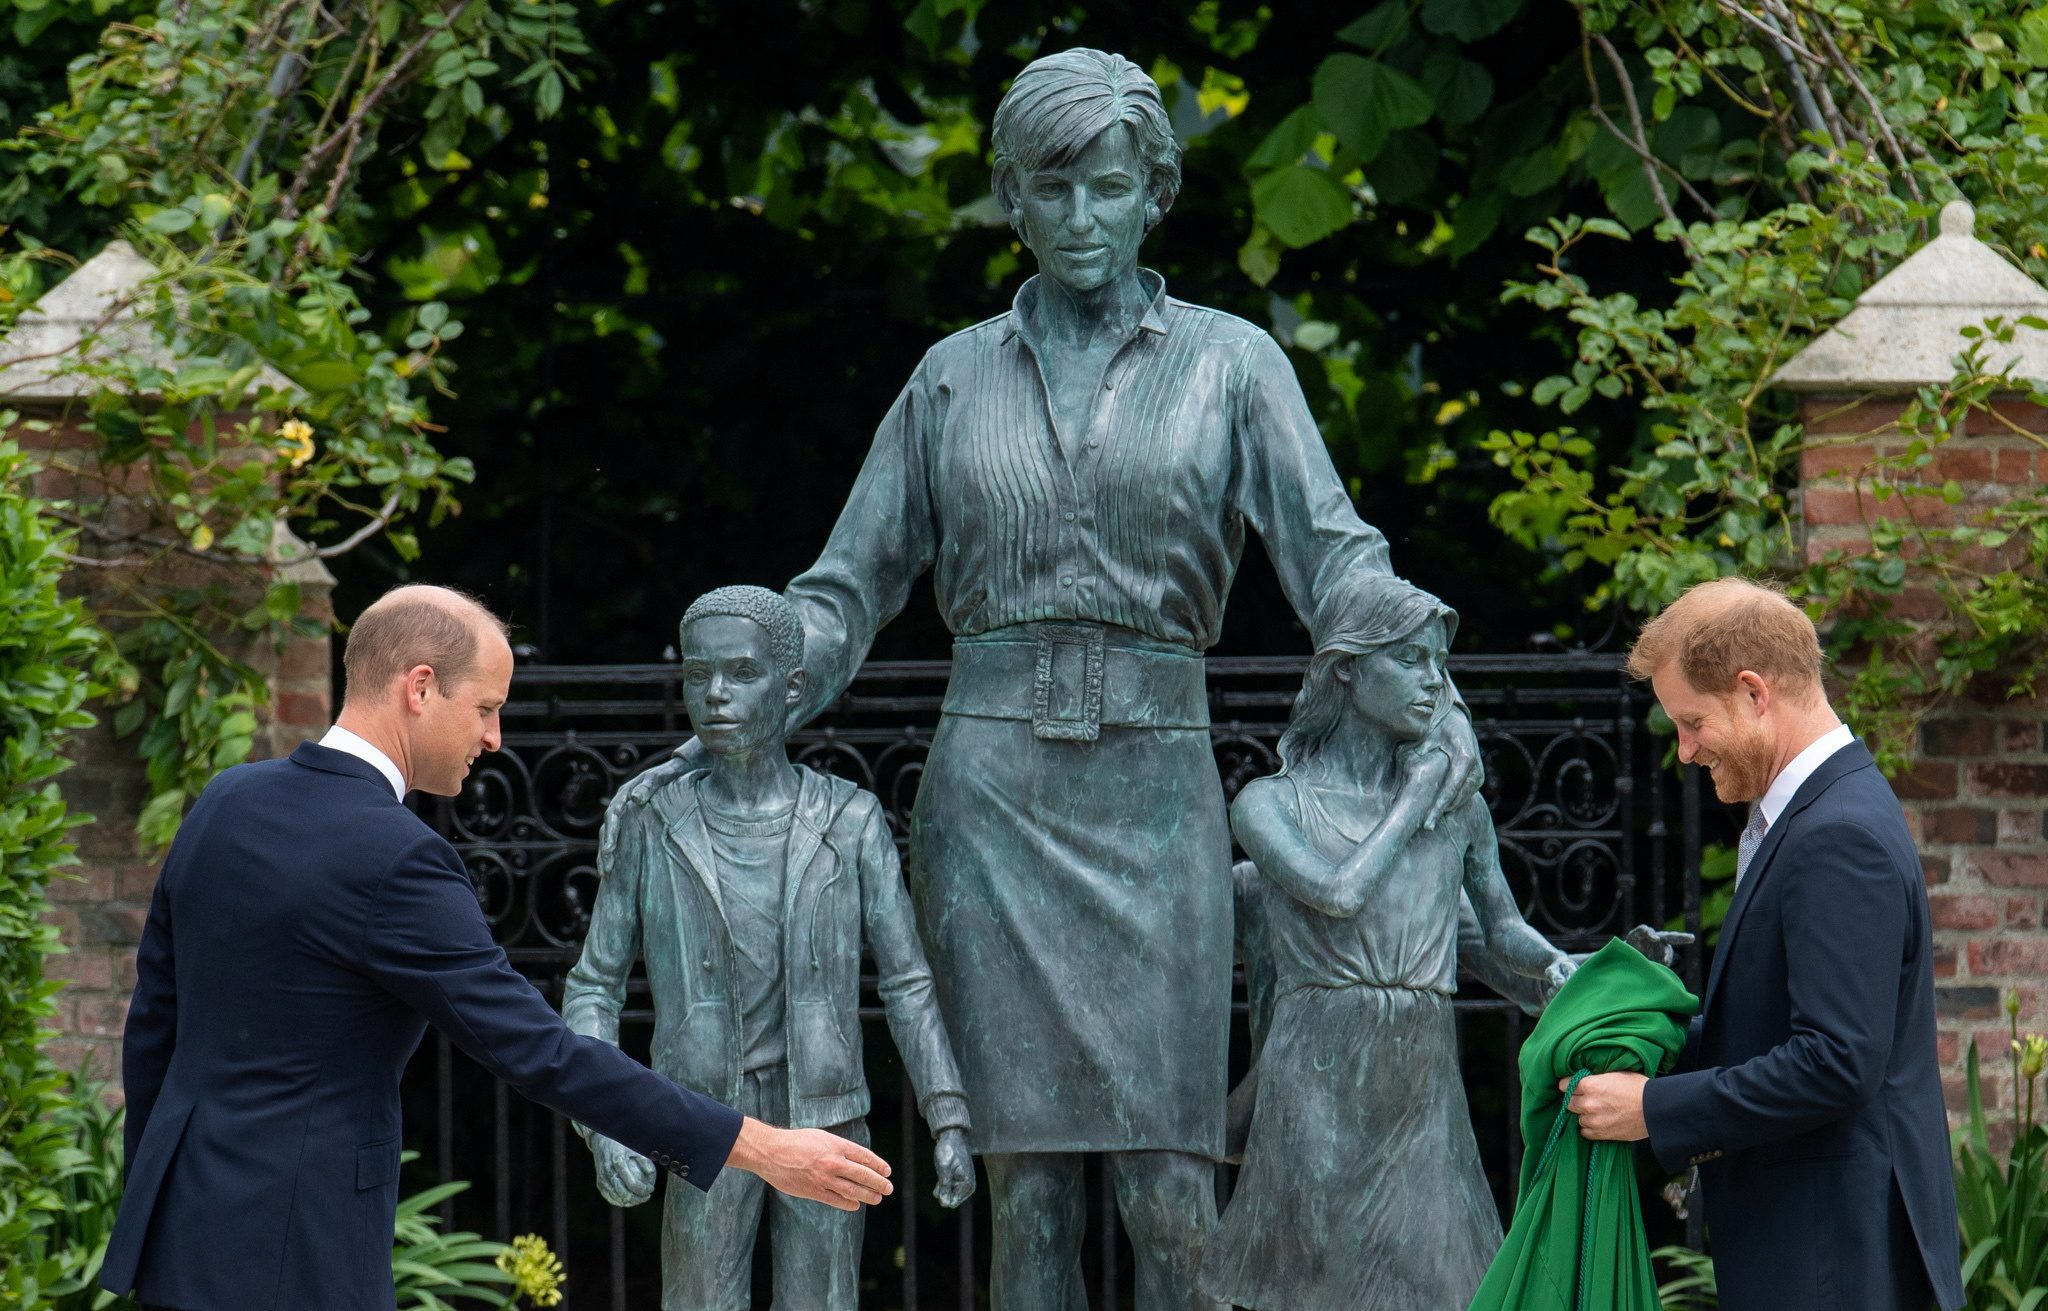 Britain’s William and Harry put feud aside to unveil Princess Diana statue